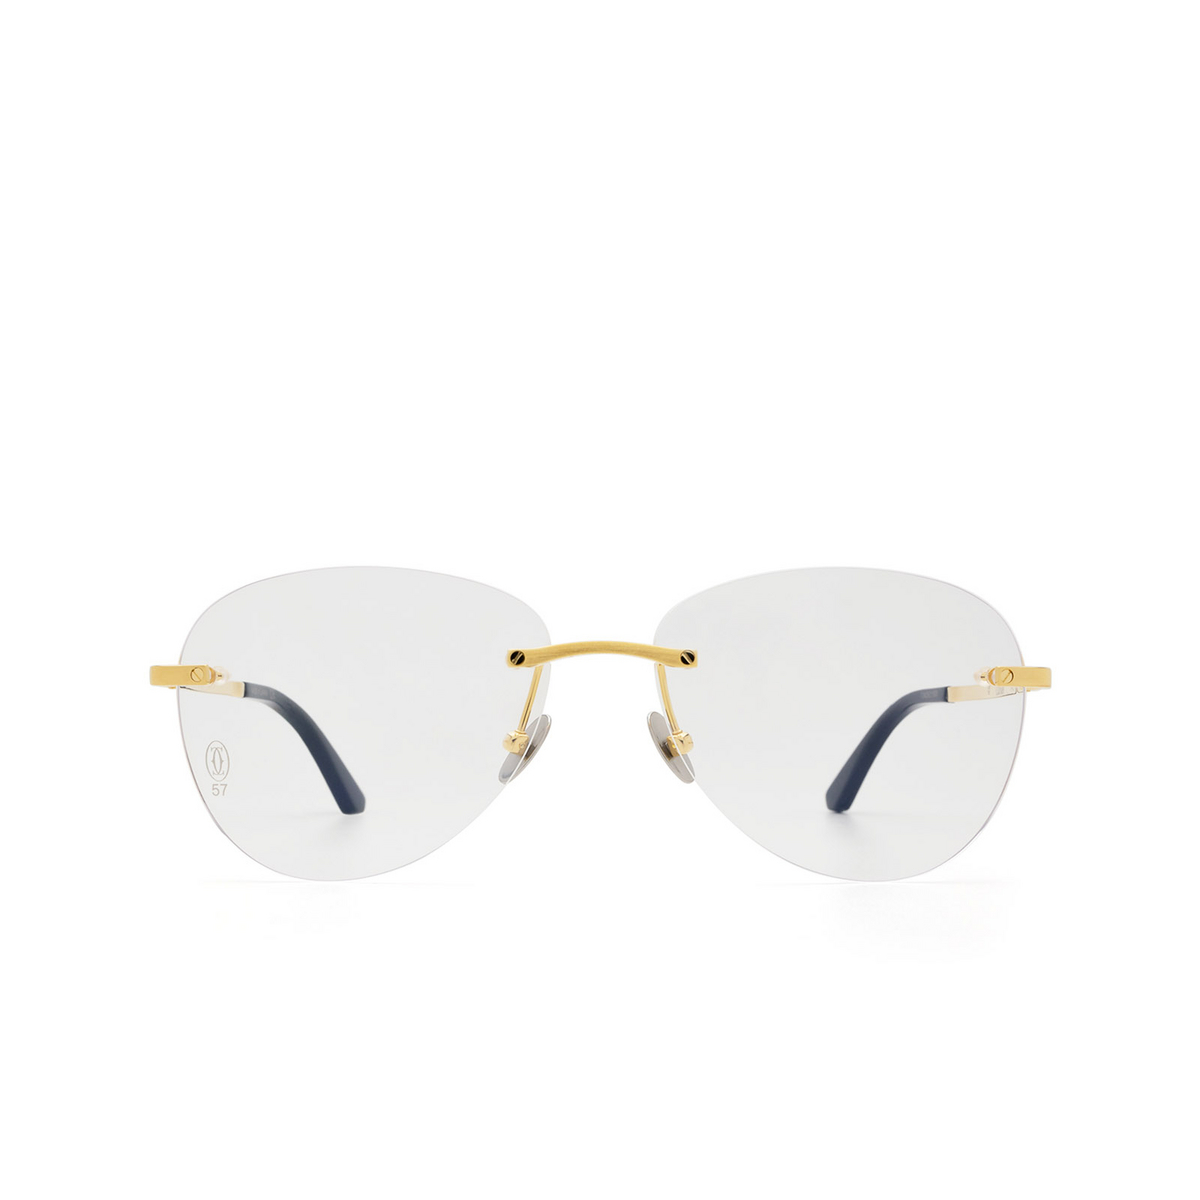 Cartier® Aviator Eyeglasses: CT0254O color Gold 001 - front view.